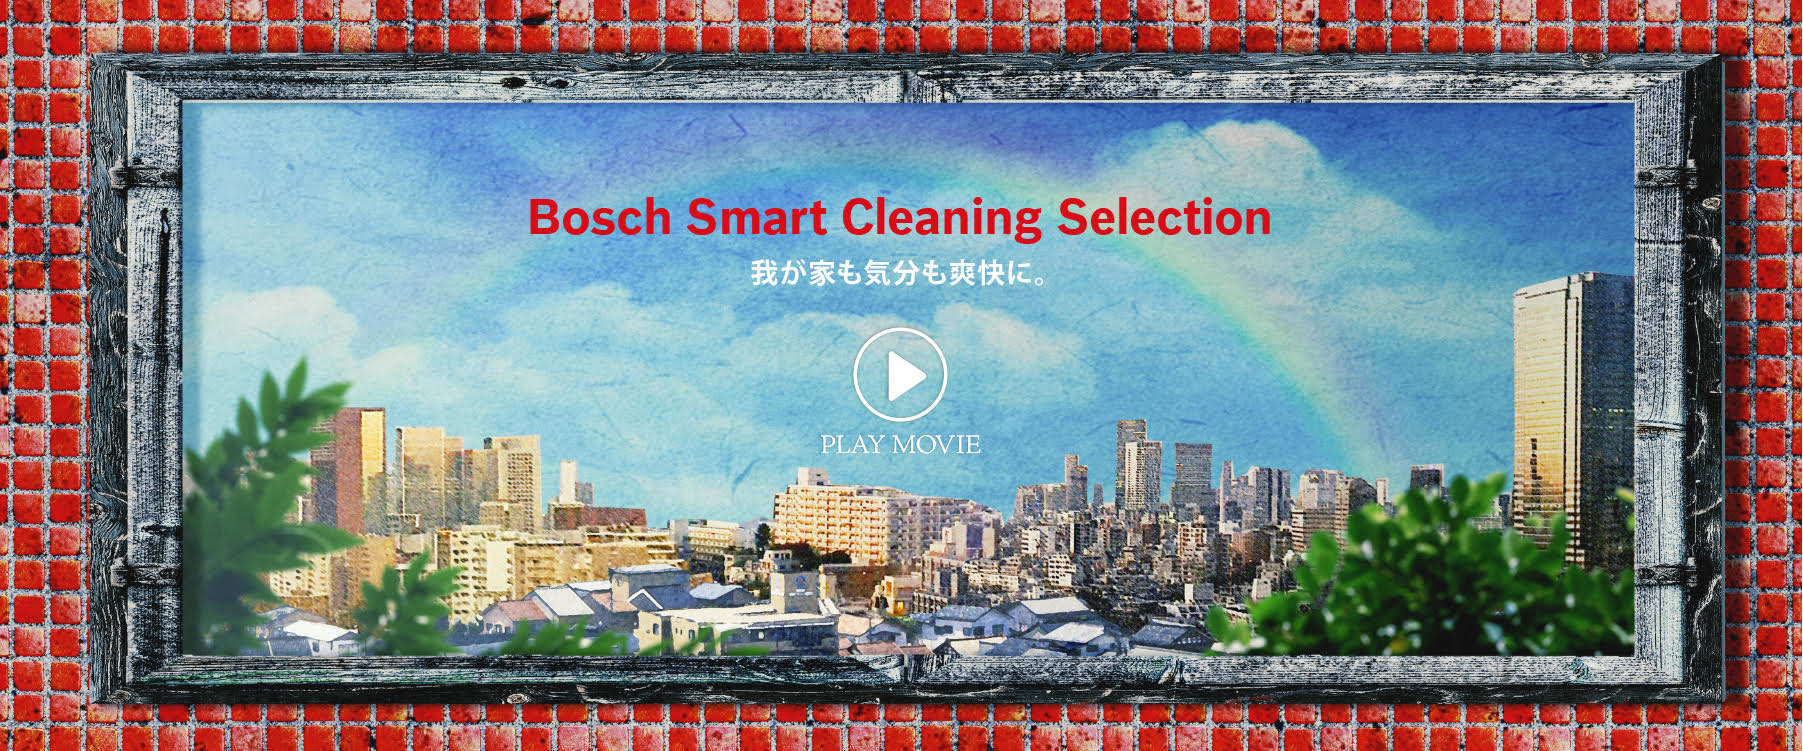 Bosch Smart Cleaning Selection 我が家も気分も爽快に。